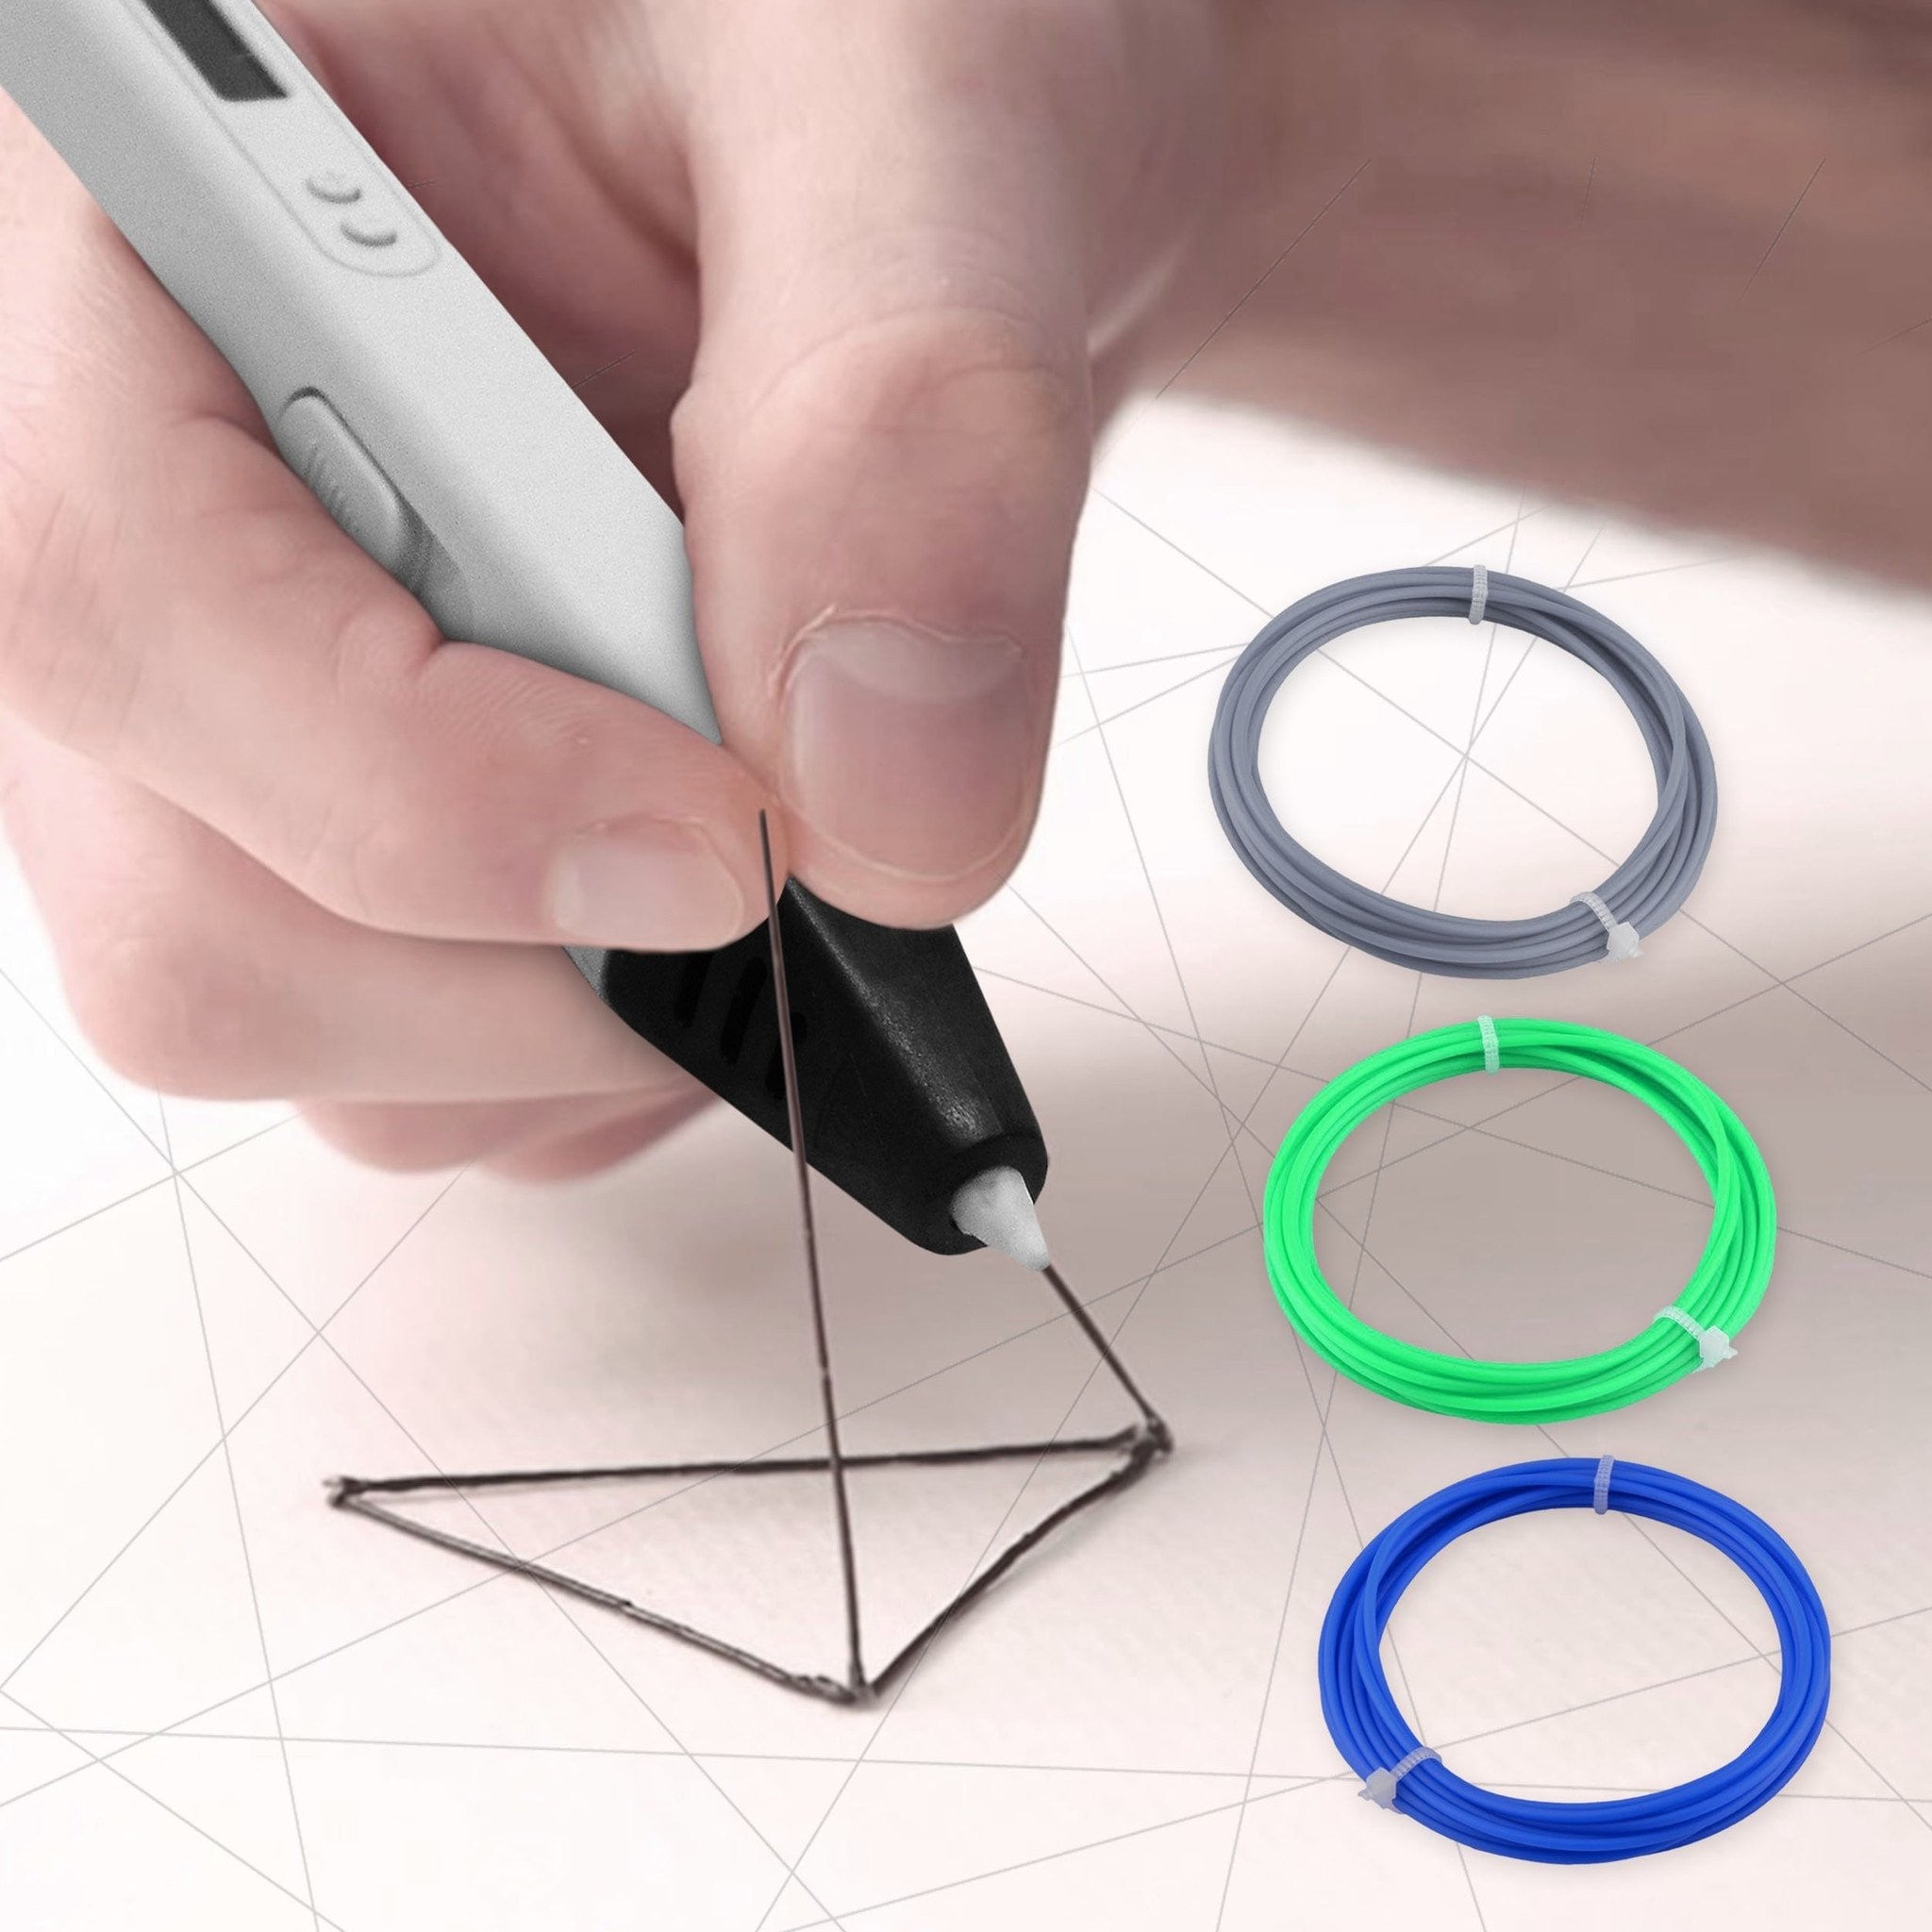 3Doodler Pen FAQ: All You Need to Know About It